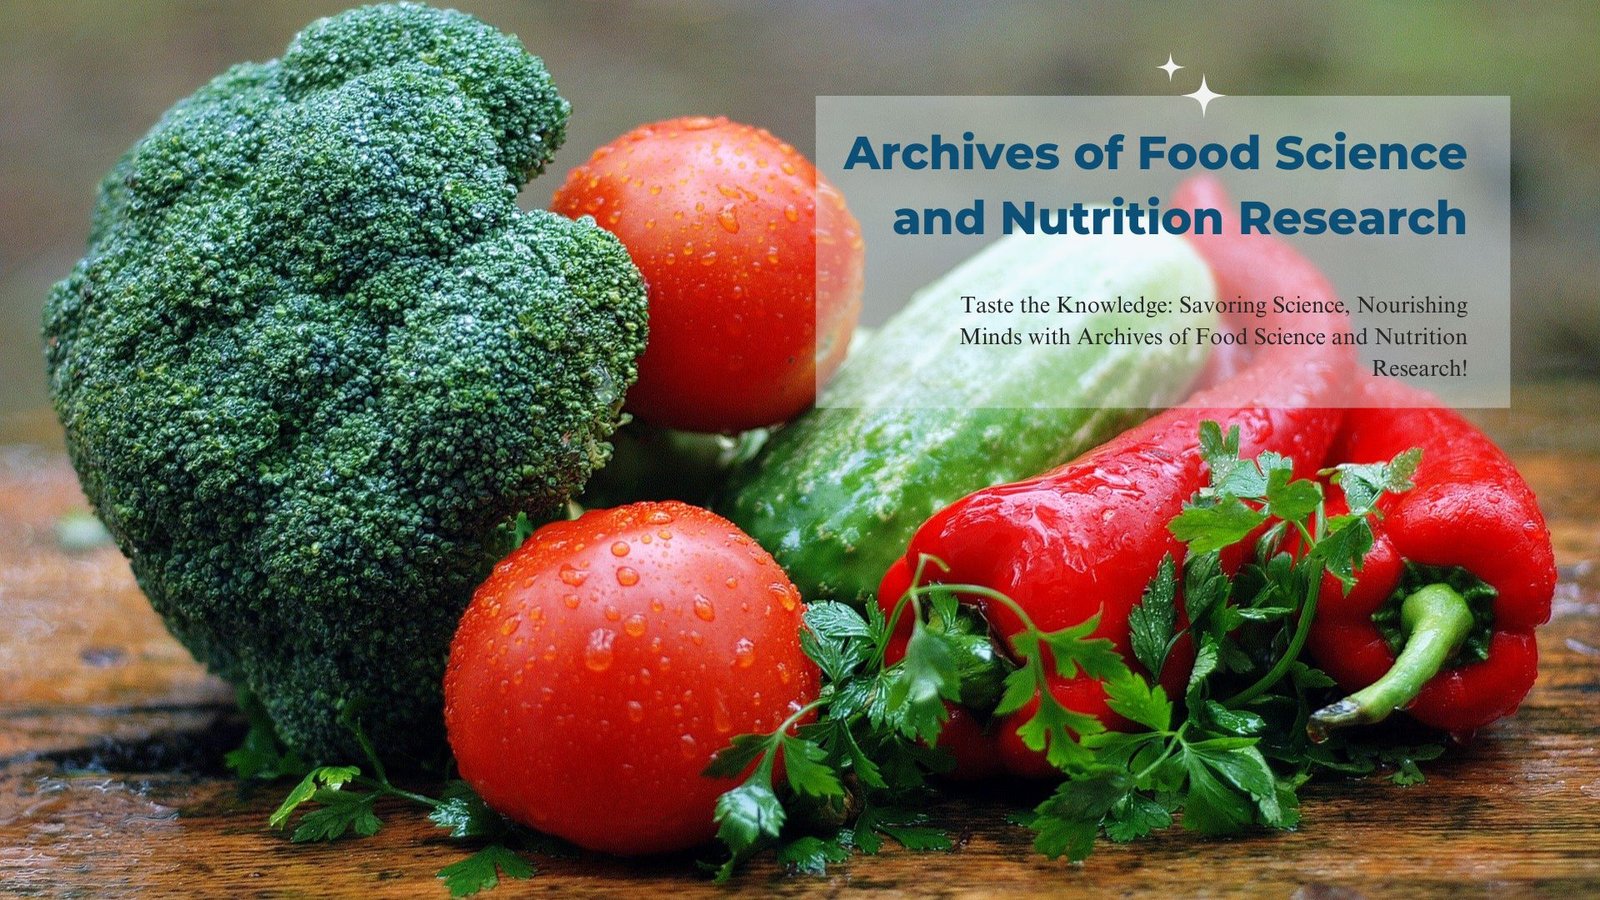 Food Science and Nutrition Research